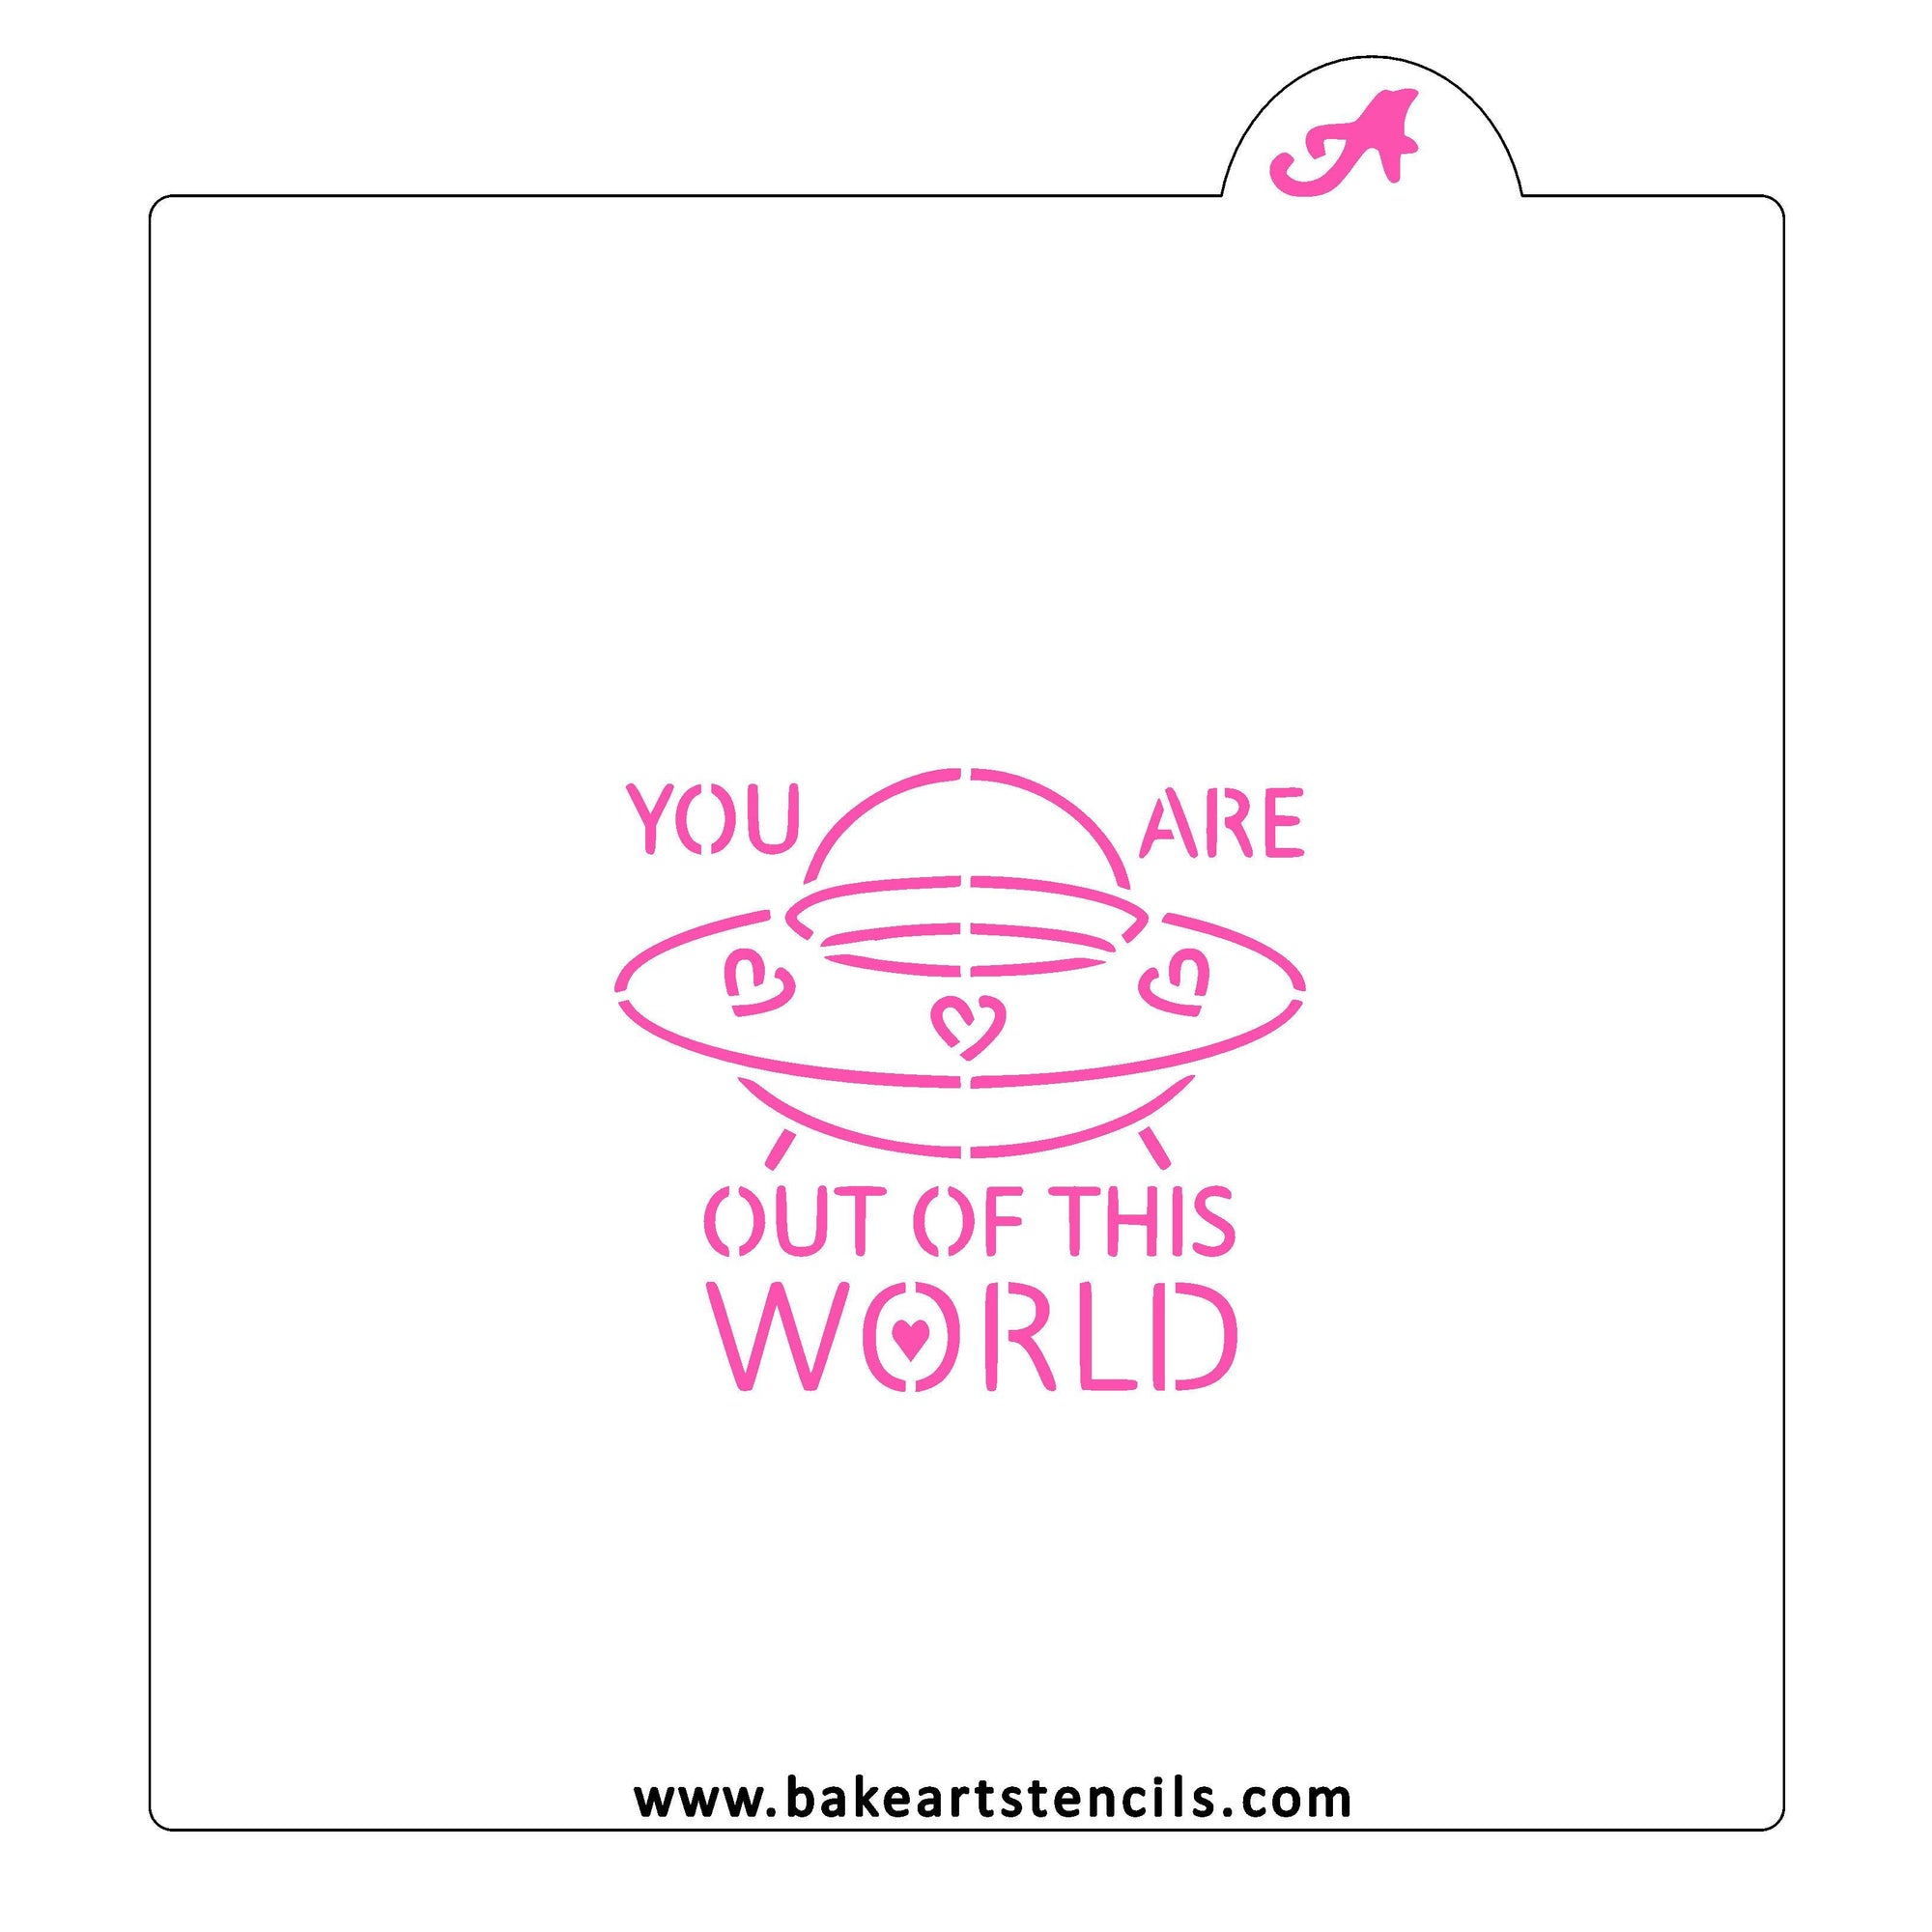 You're Out of this World PYO Stencil bakeartstencil